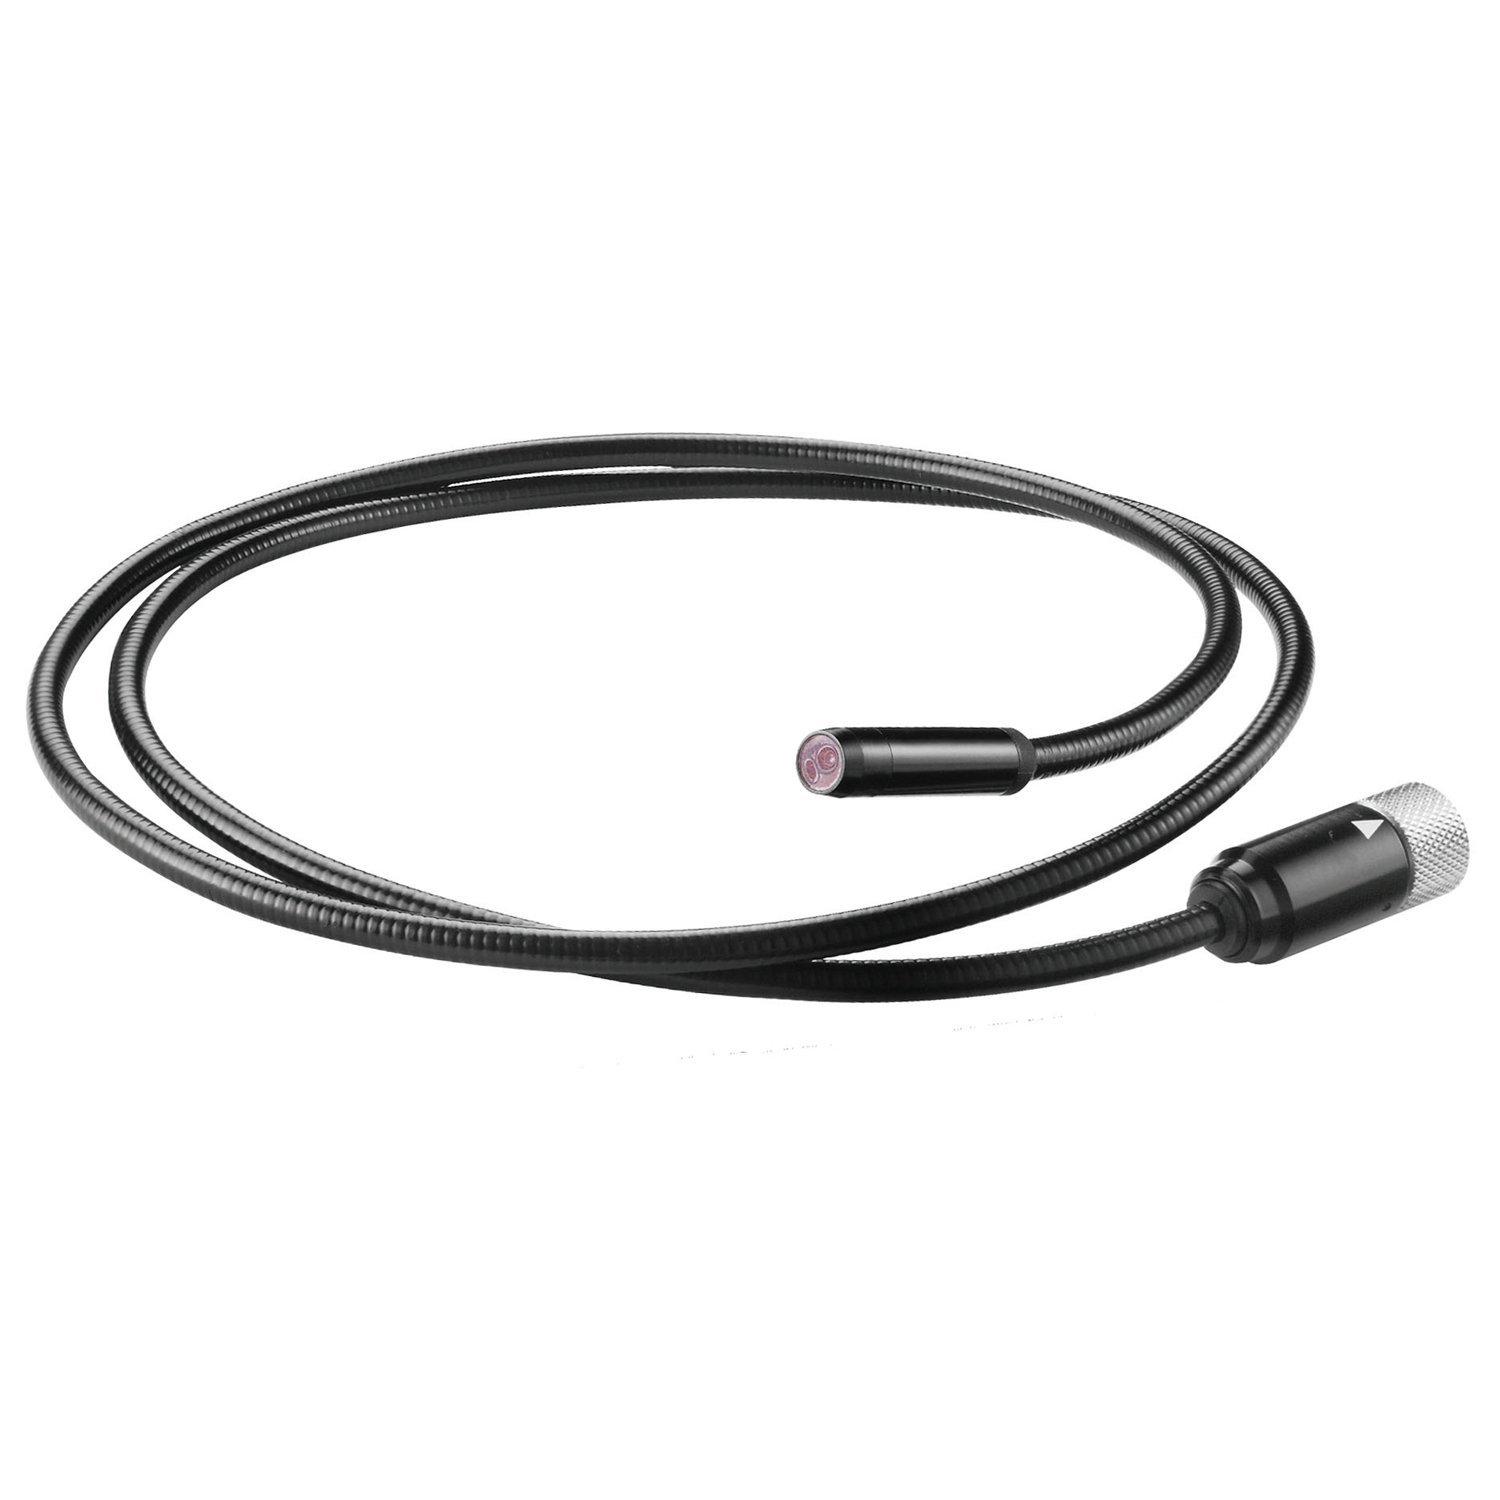 Amazon.com: ACDelco CIC802 Hard Camera Cable 8mm Head Diameter by 2m ...